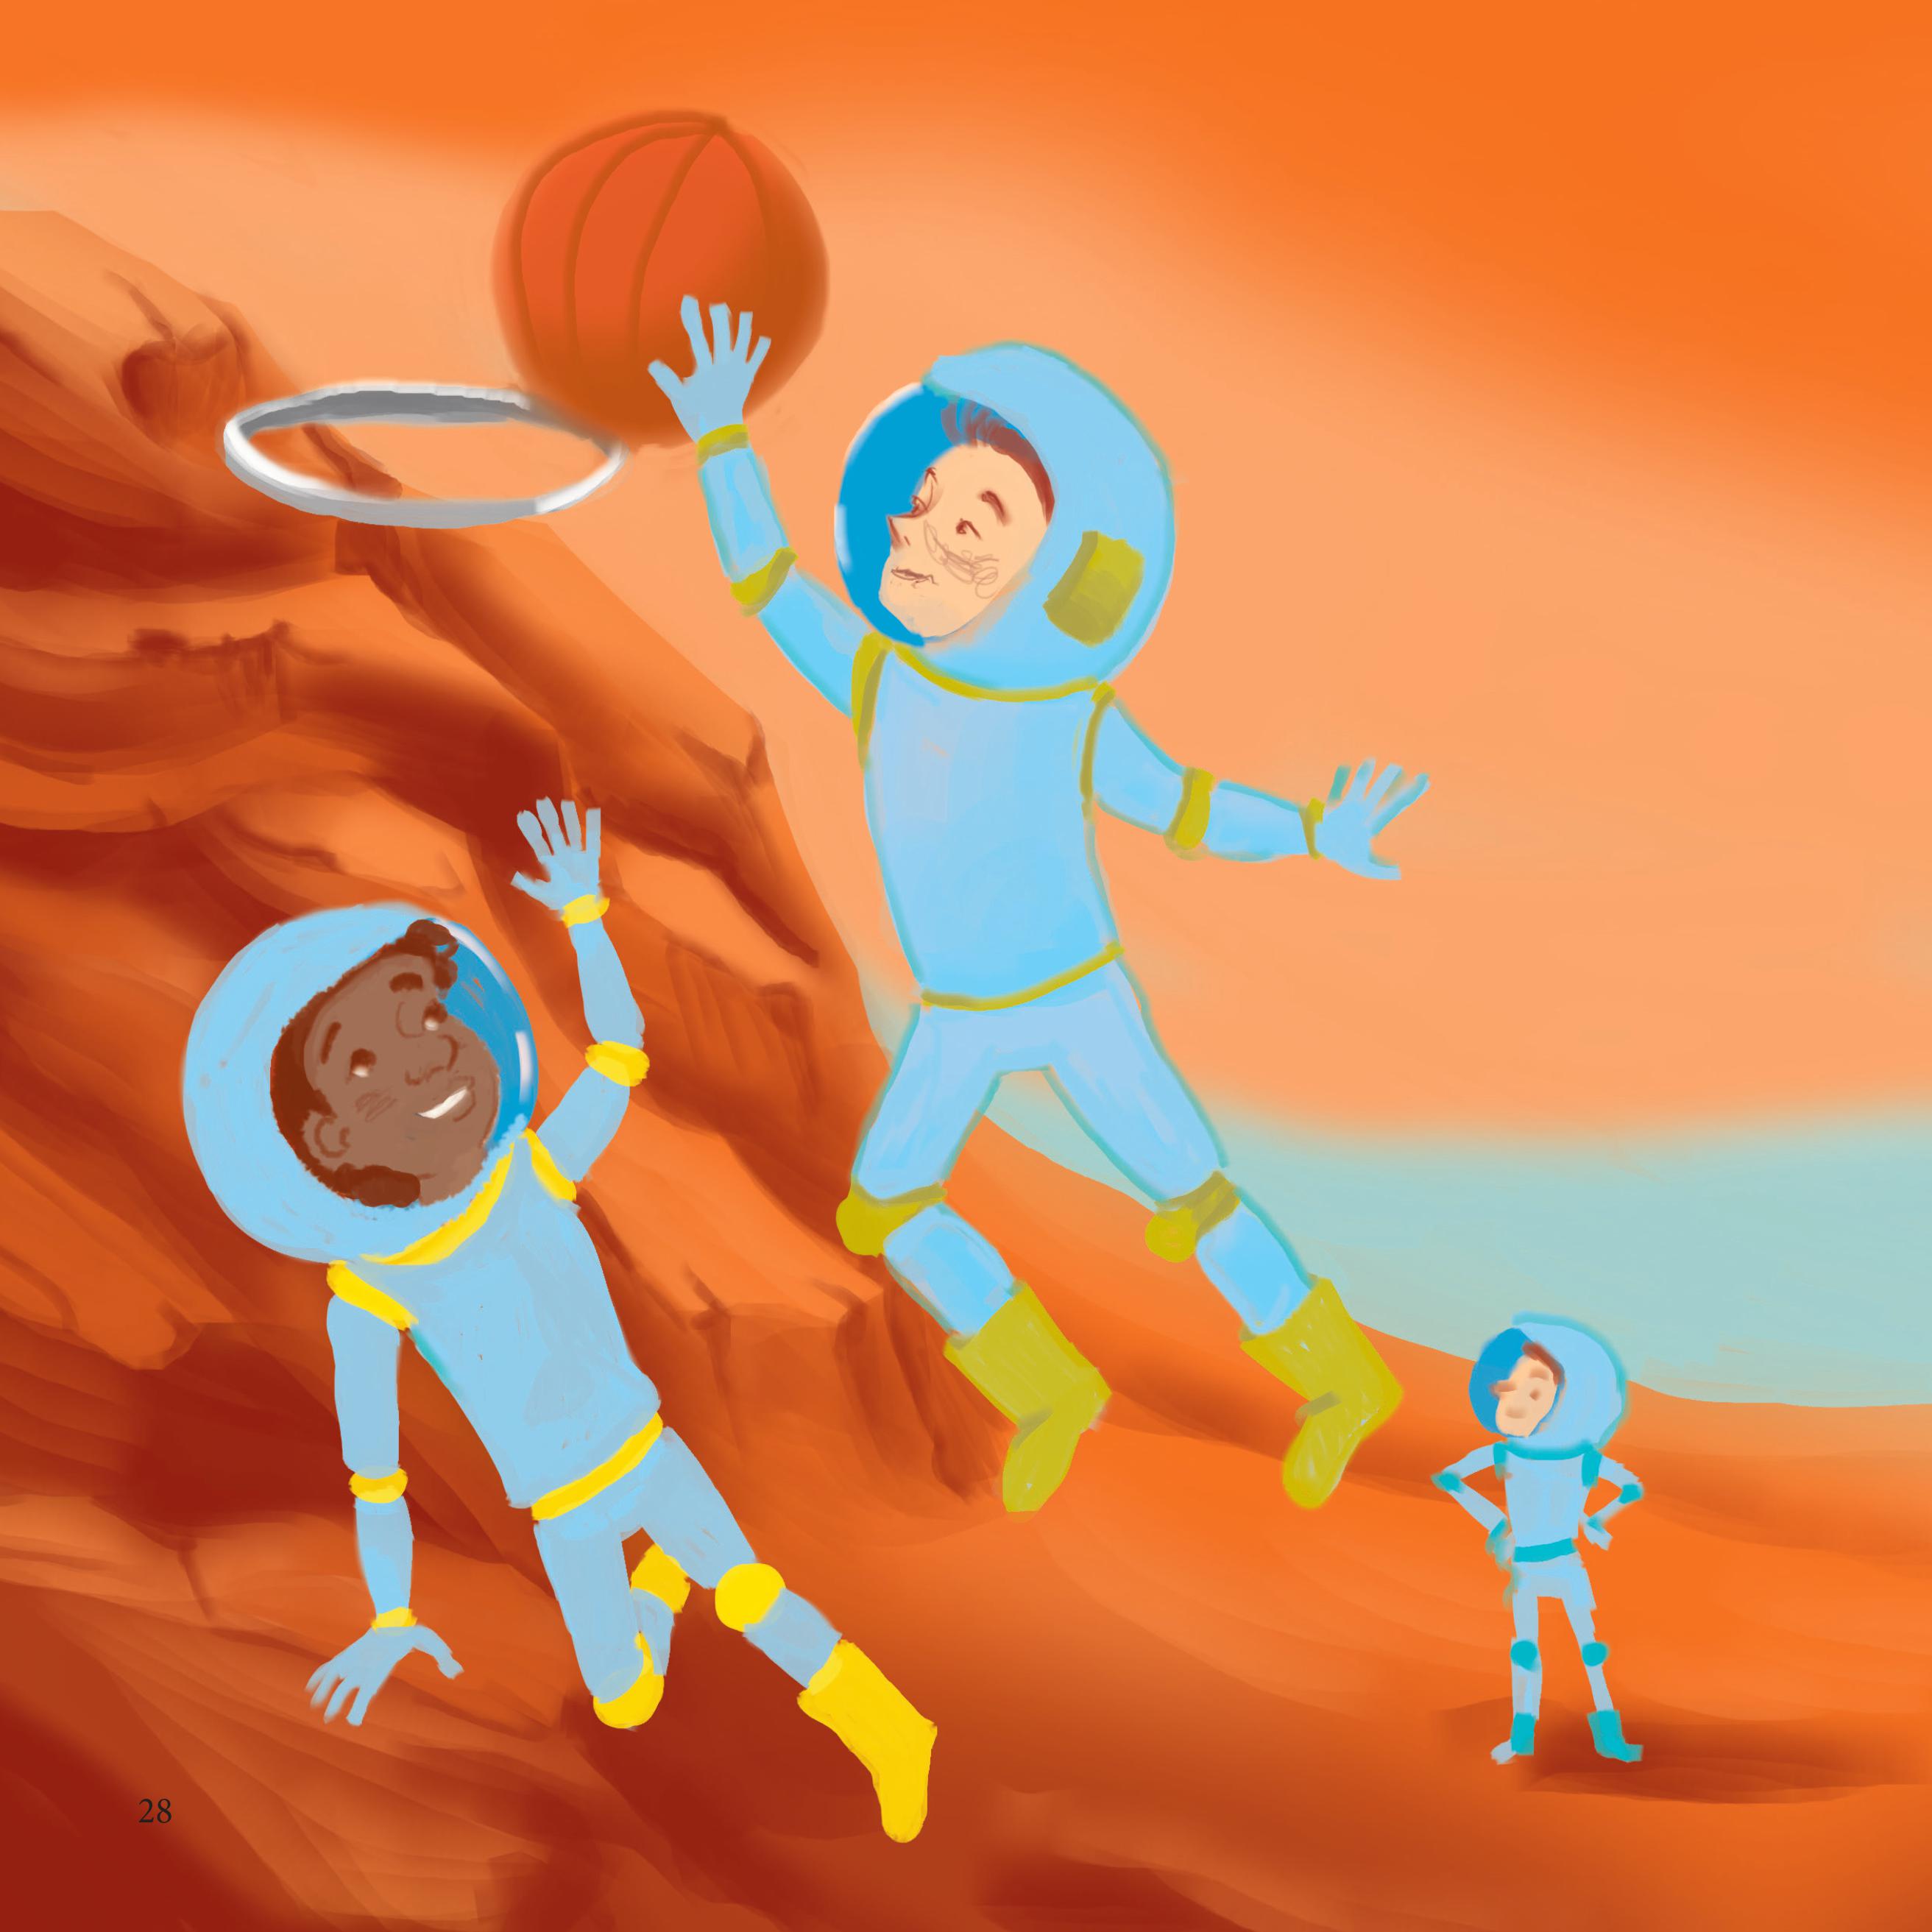 If You Were Me and Lived On Mars Illustration 2